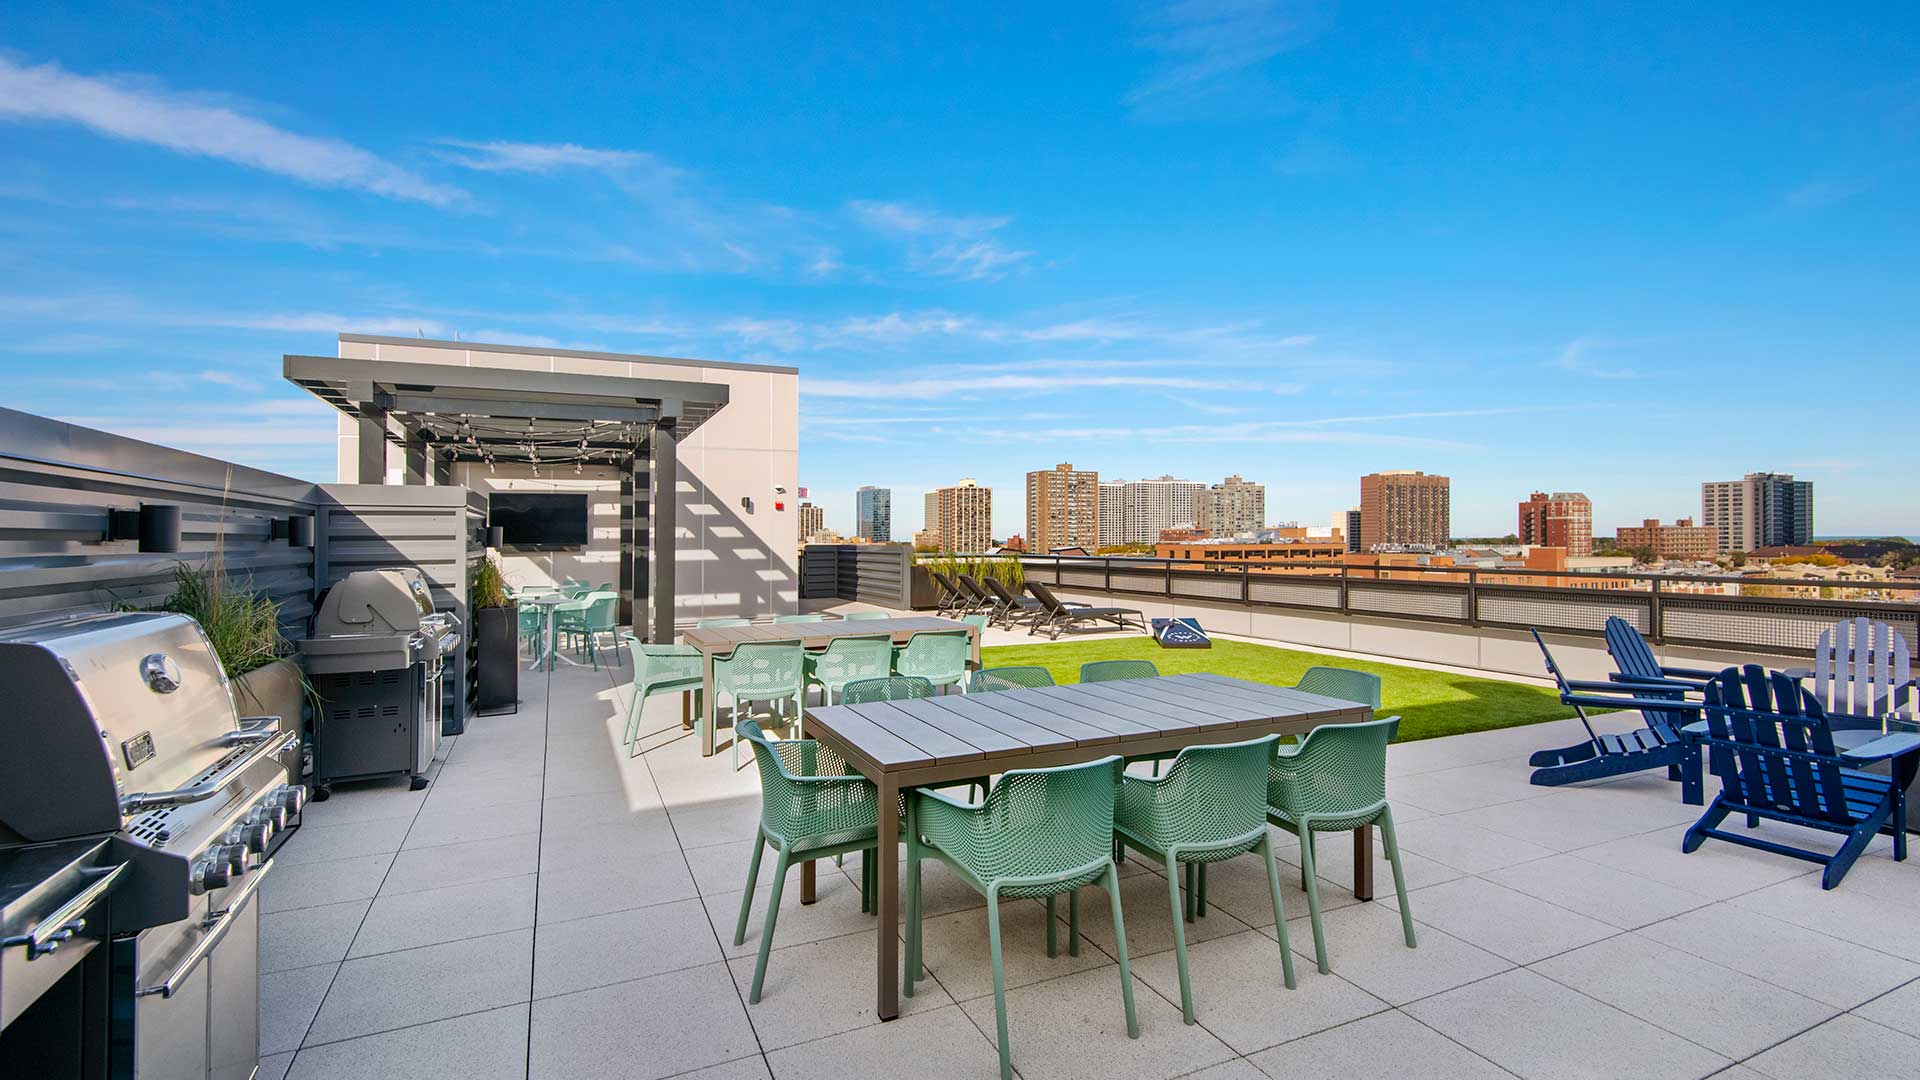 The outdoor kitchen and grilling areas on the rooftop deck at Wrigleyville Lofts. Two outdoor dining tables sit ahead of grills. A television viewing area is behind.